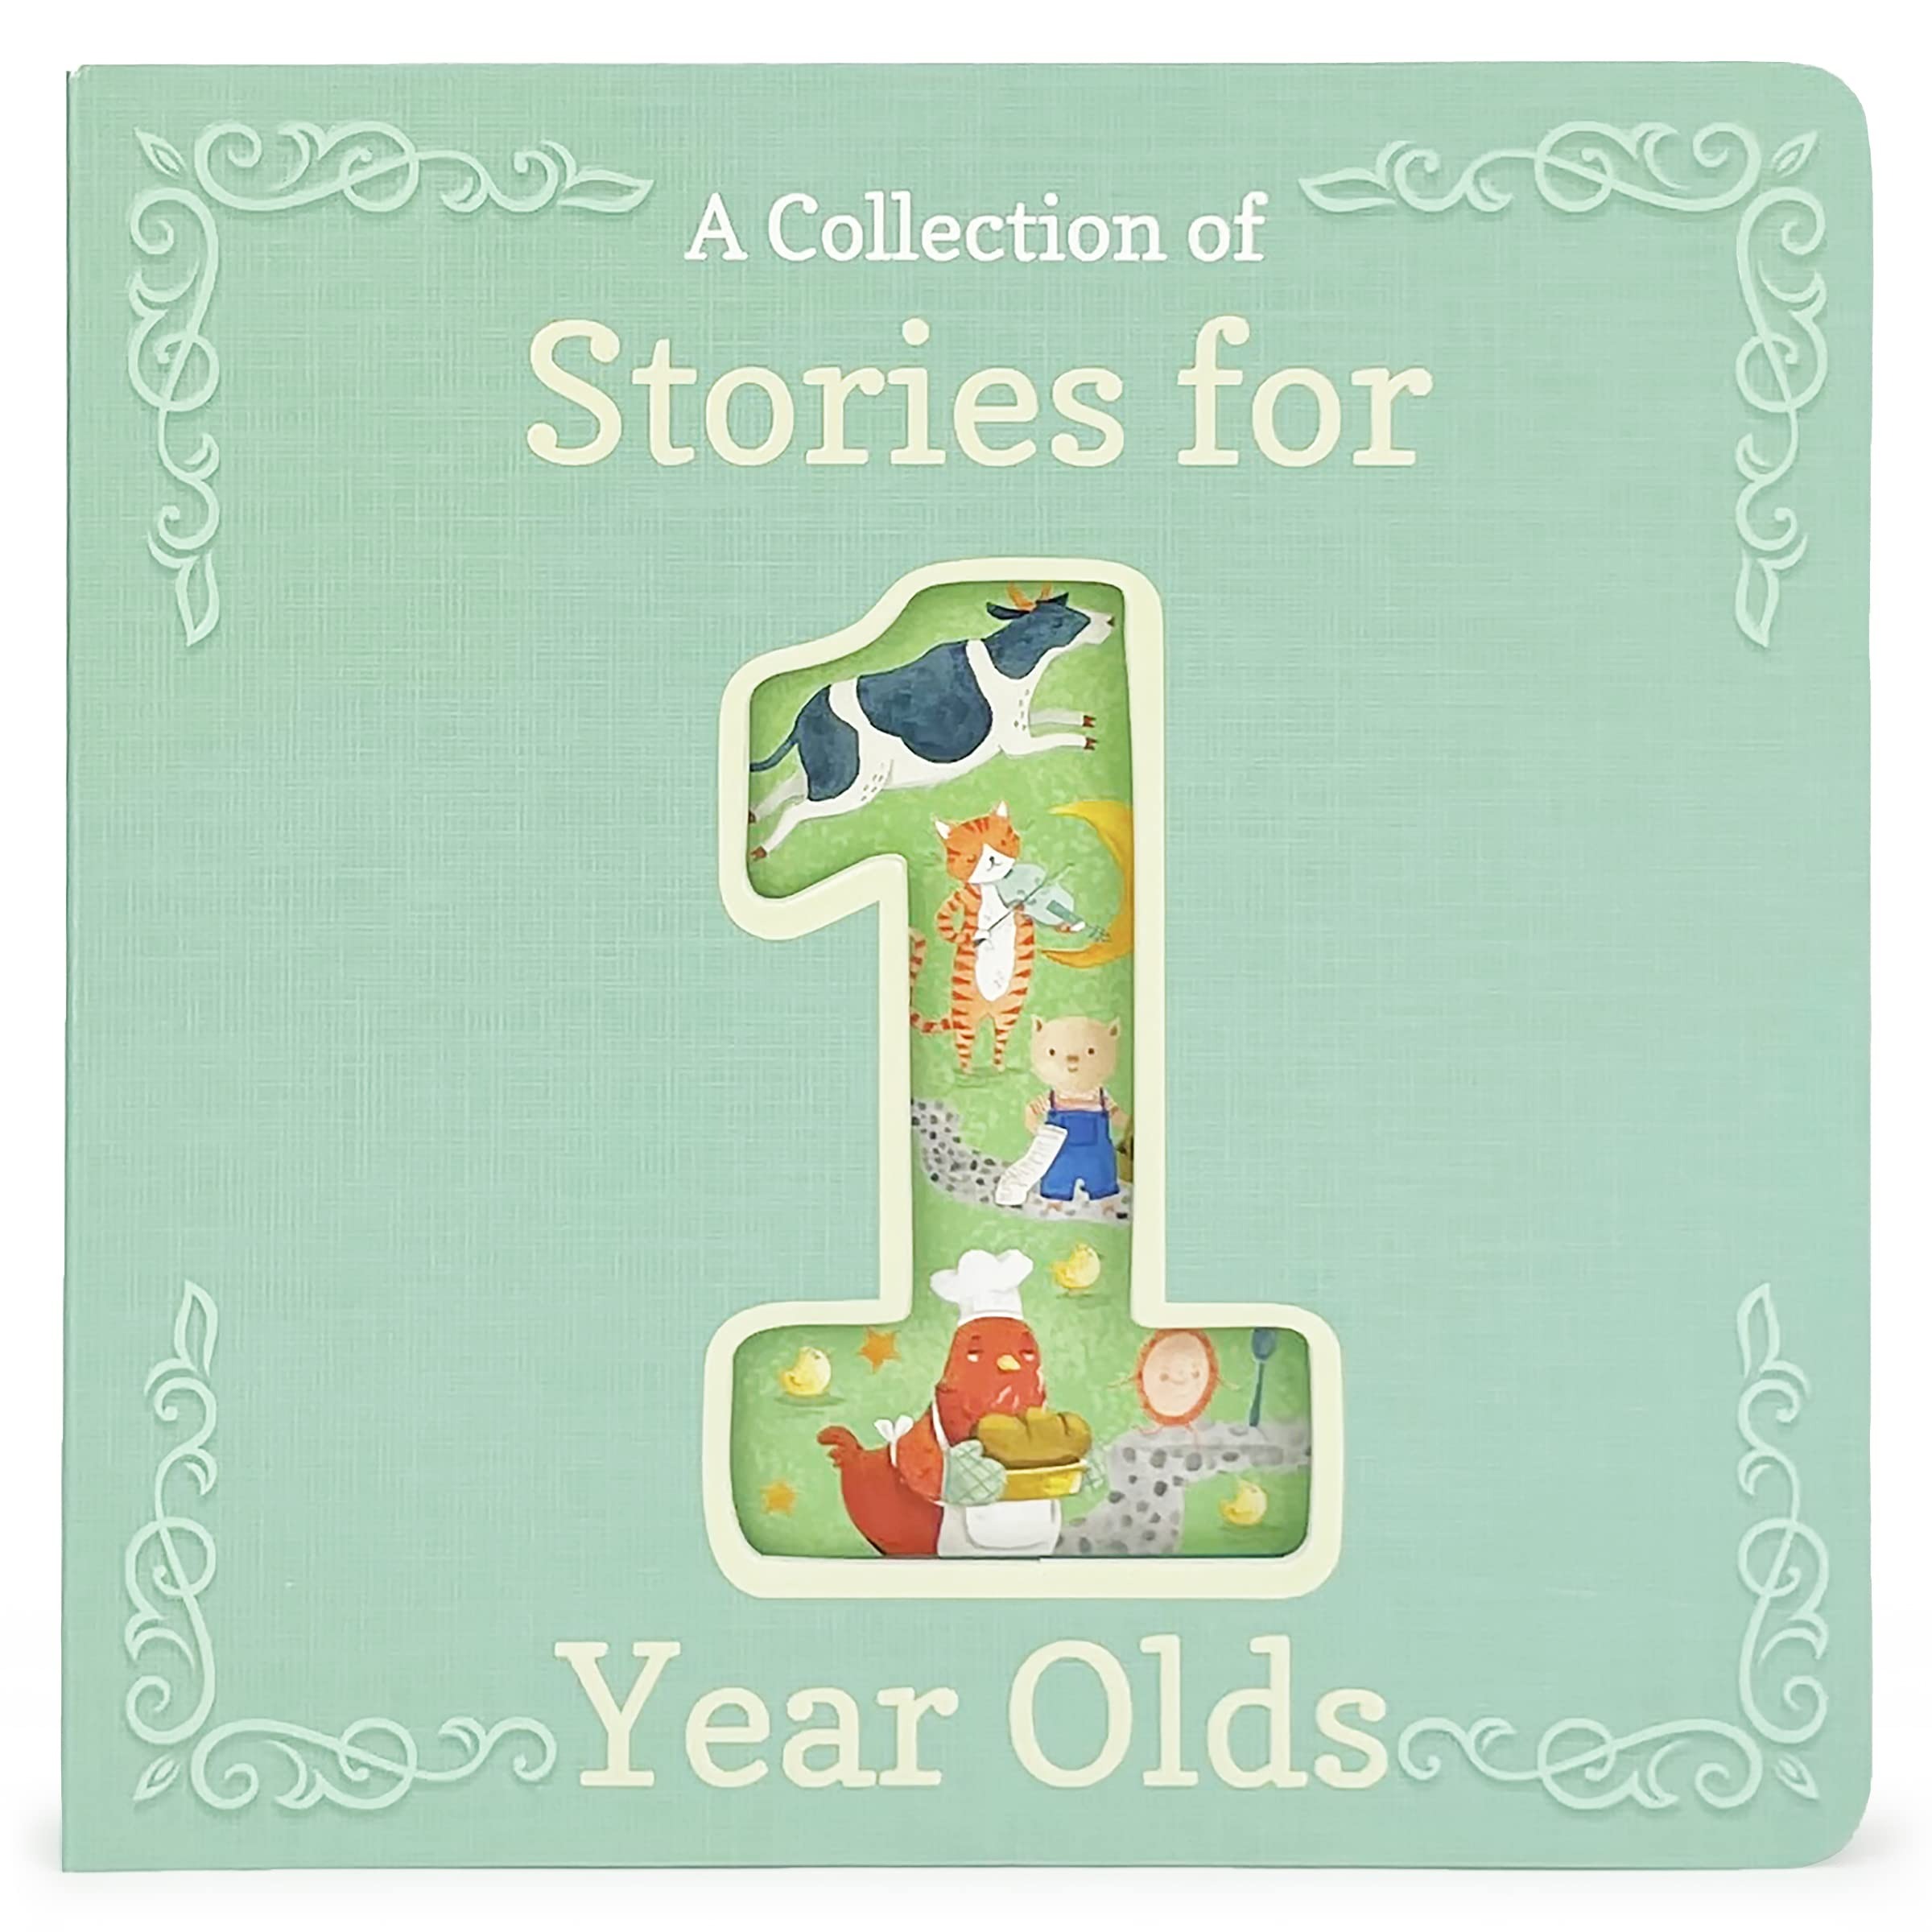 Cottage Door Press A Collection of Stories for 1 Year Olds